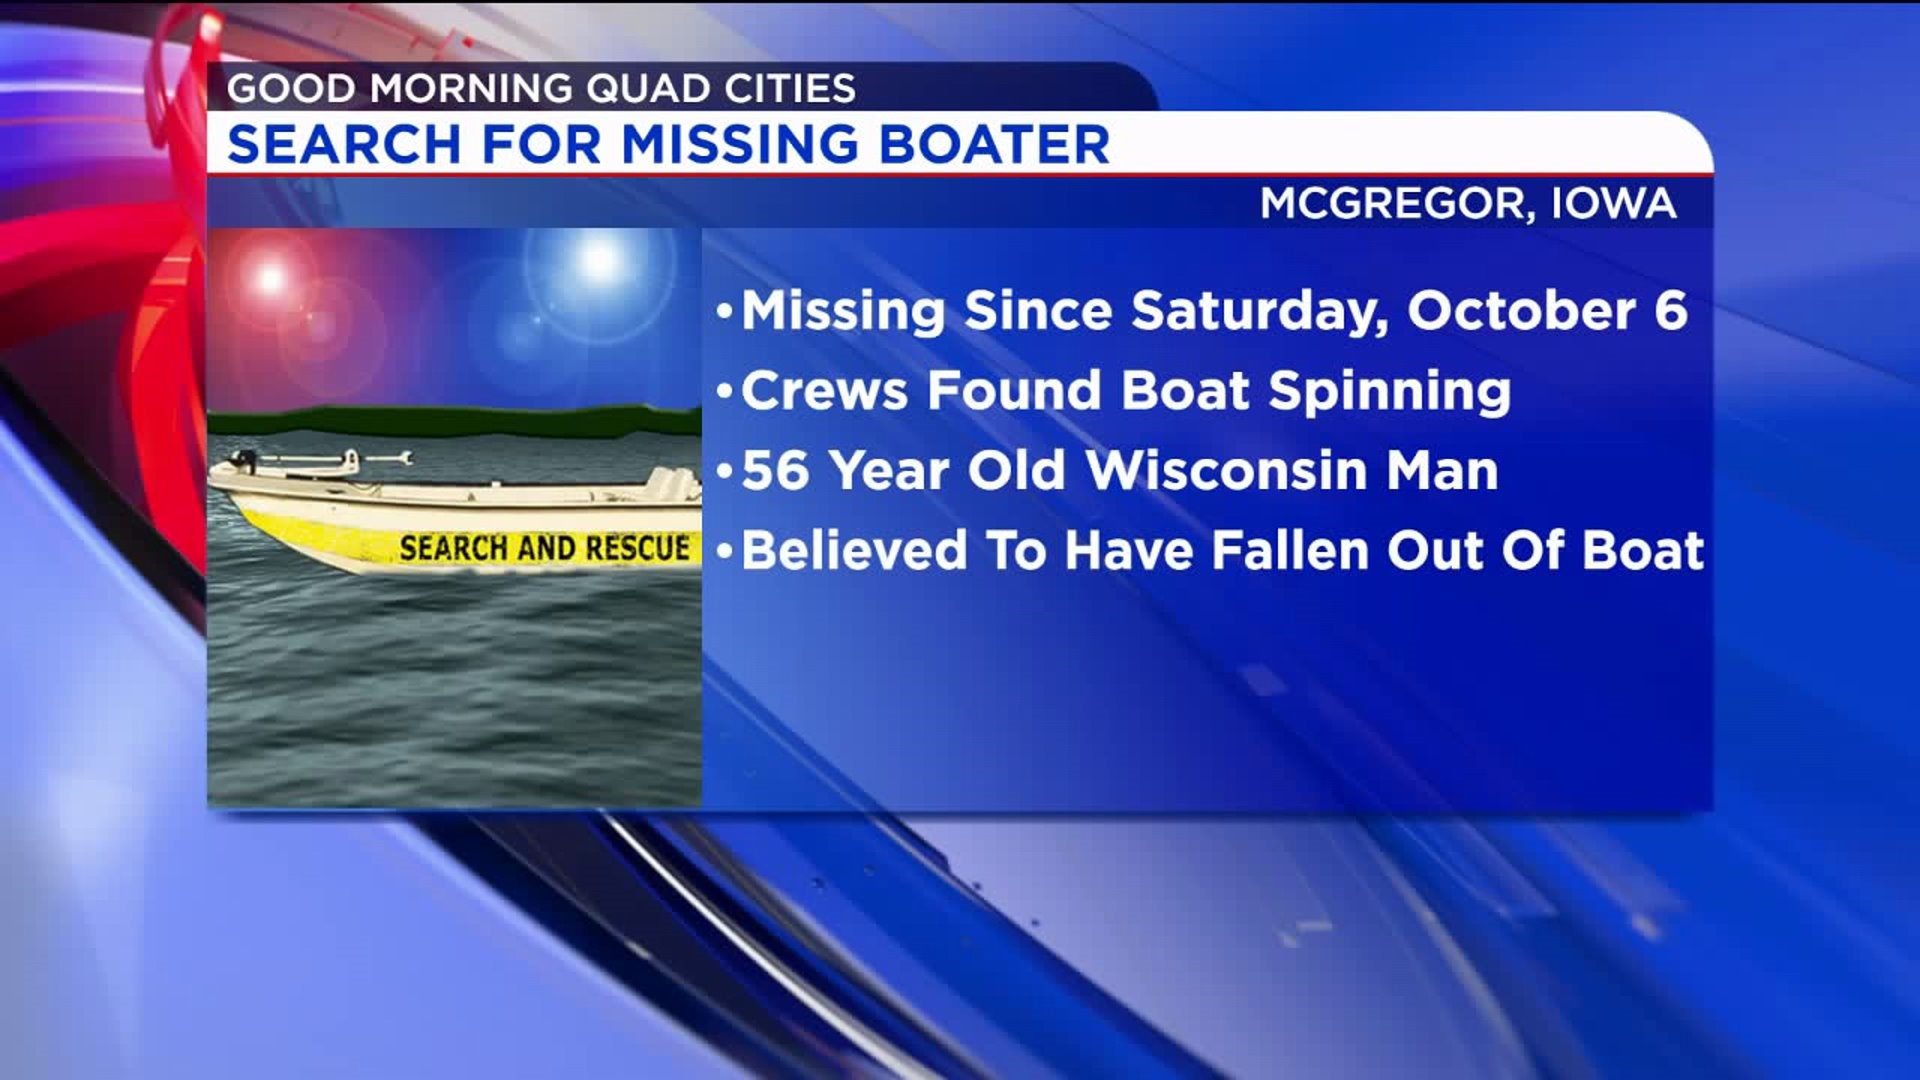 Search for Missing Boater